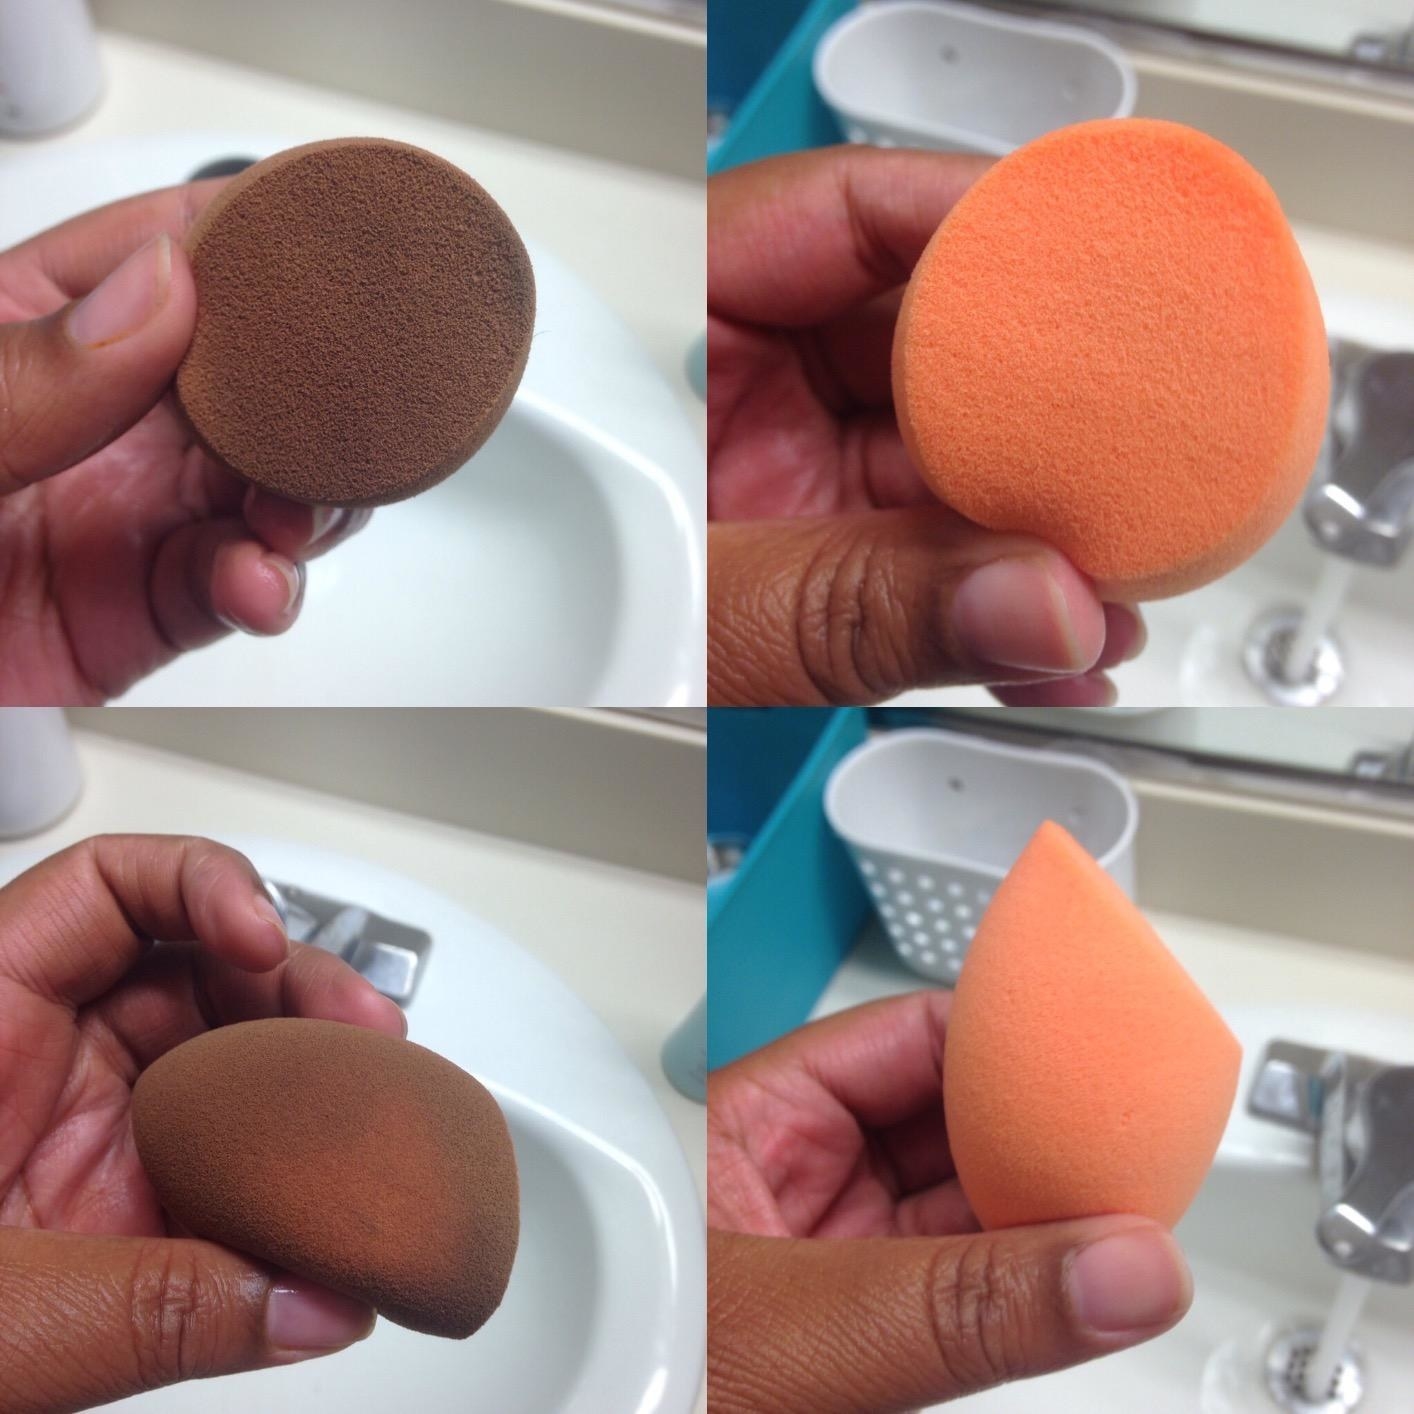 Reviewer's beauty blender covered in makeup and brown, and the same beauty blender, restored to it's original light orange color after being washed with the shampoo